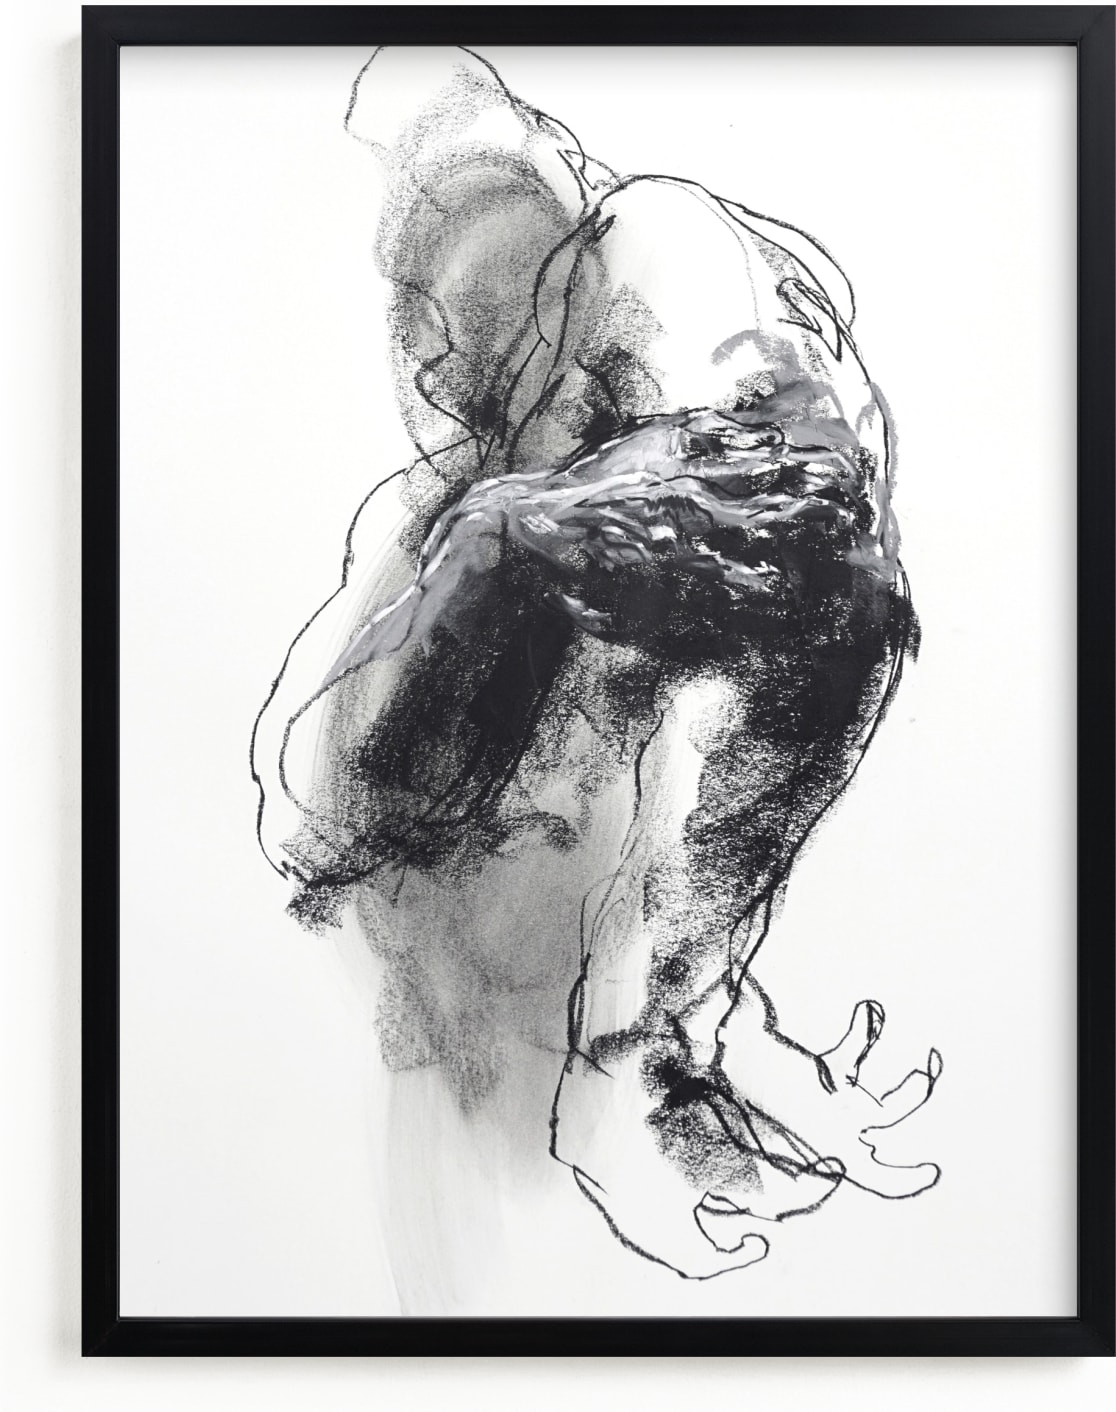 This is a black and white art by Derek overfield called Drawing 340 - Grasping Man.